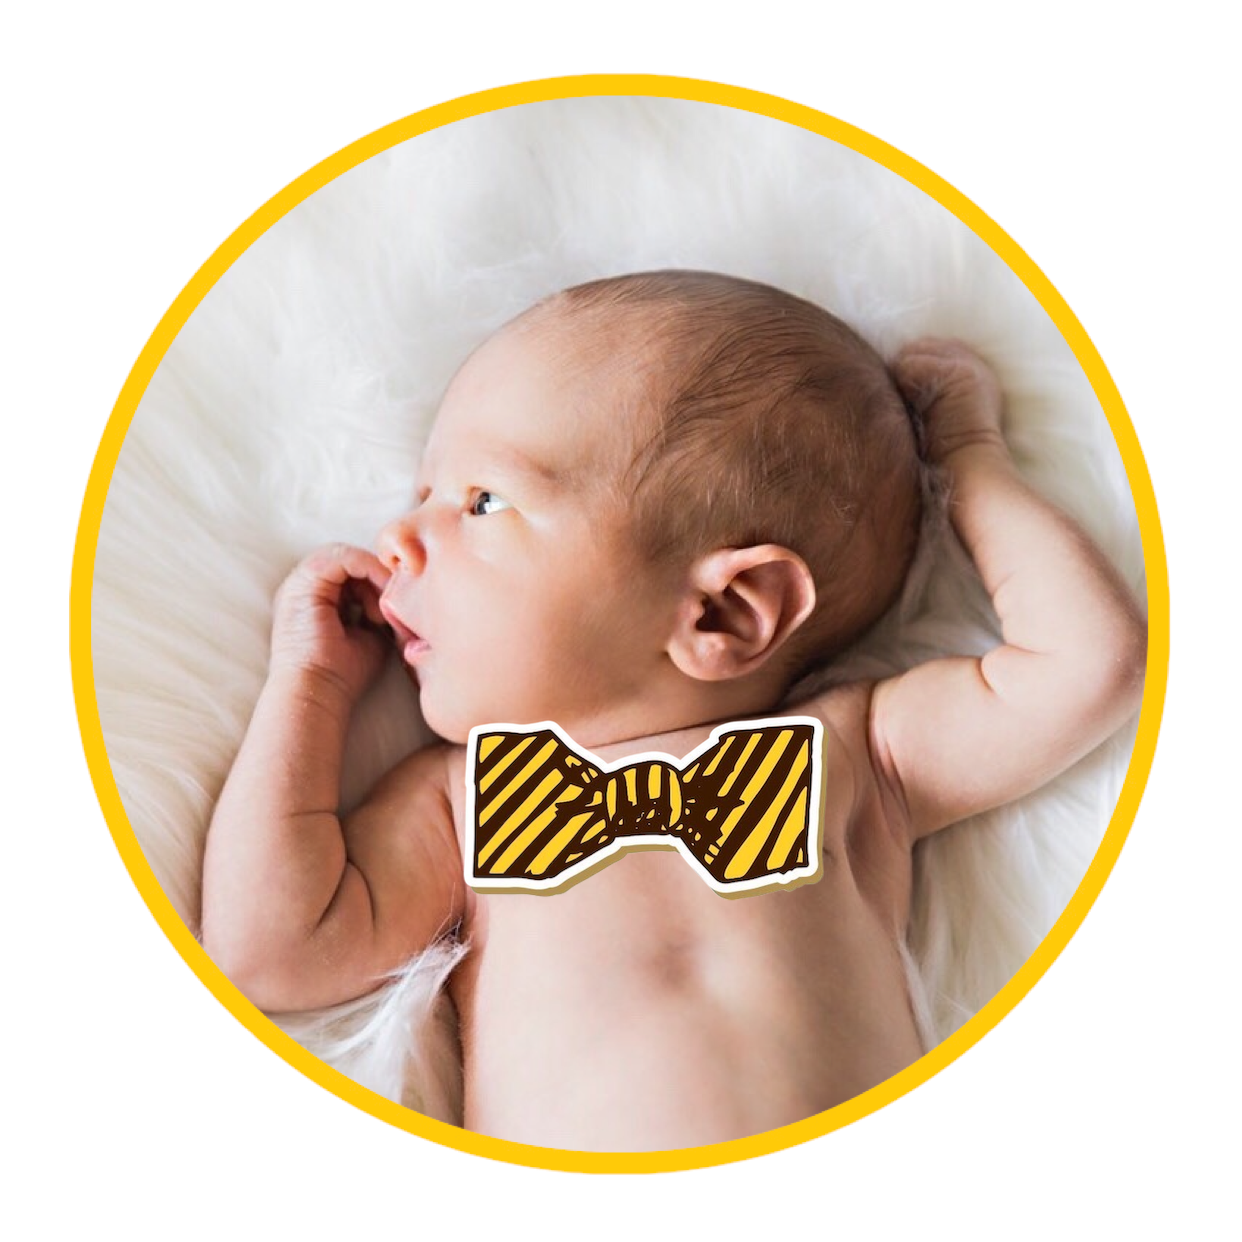 A Baby Wearing A Yellow And Black Striped Bow Tie Whatsapp Sticker Template